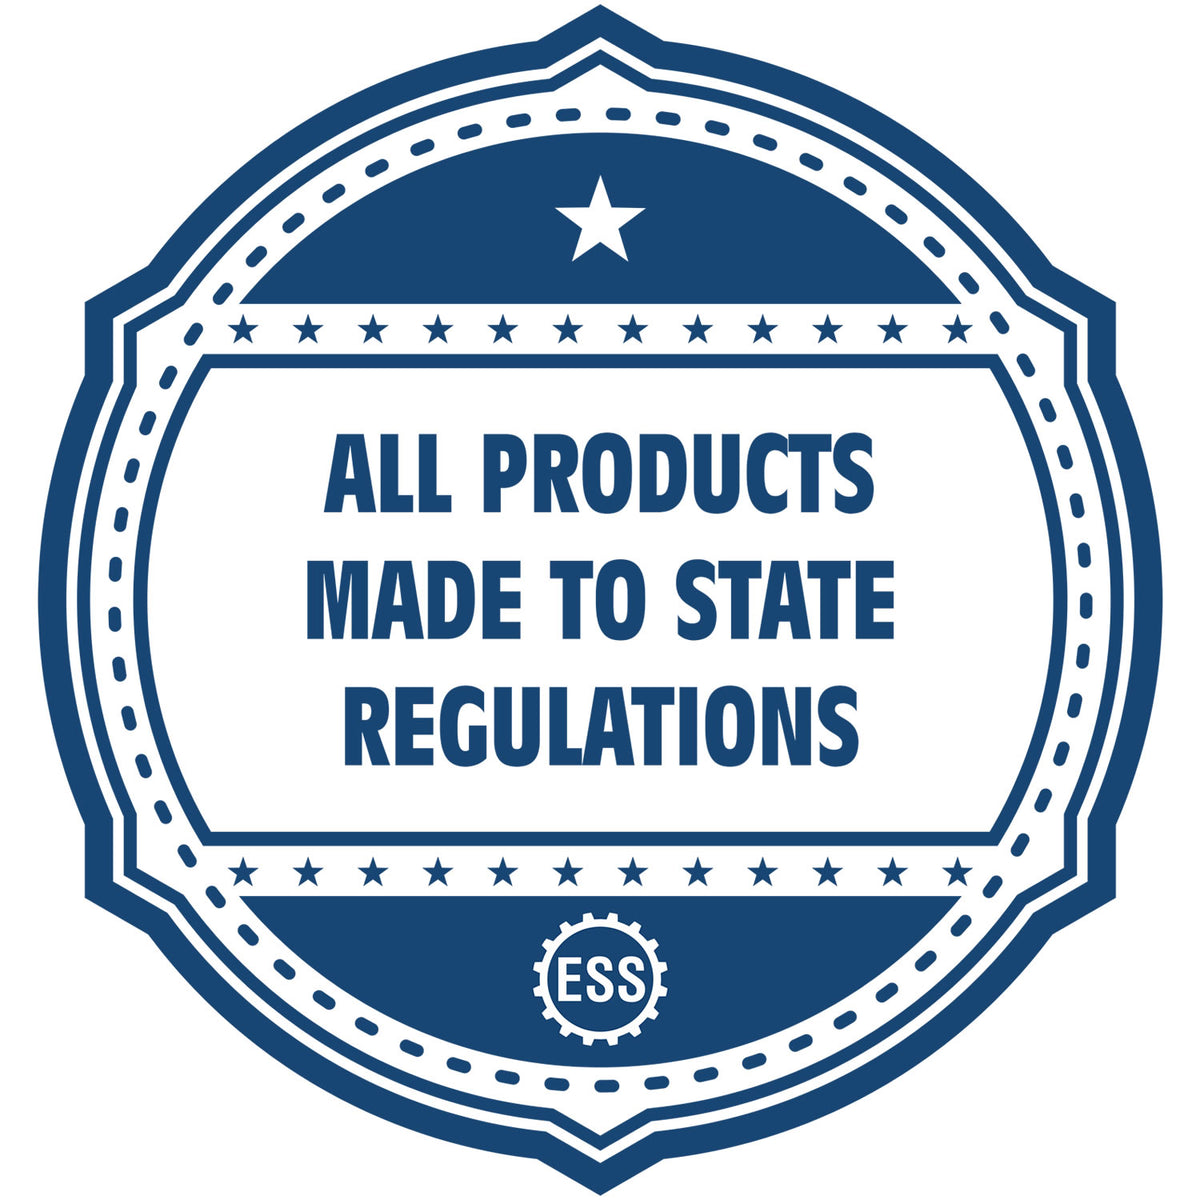 A blue icon or badge for the Self-Inking Kentucky Geologist Stamp showing that this product is made in compliance with state regulations.